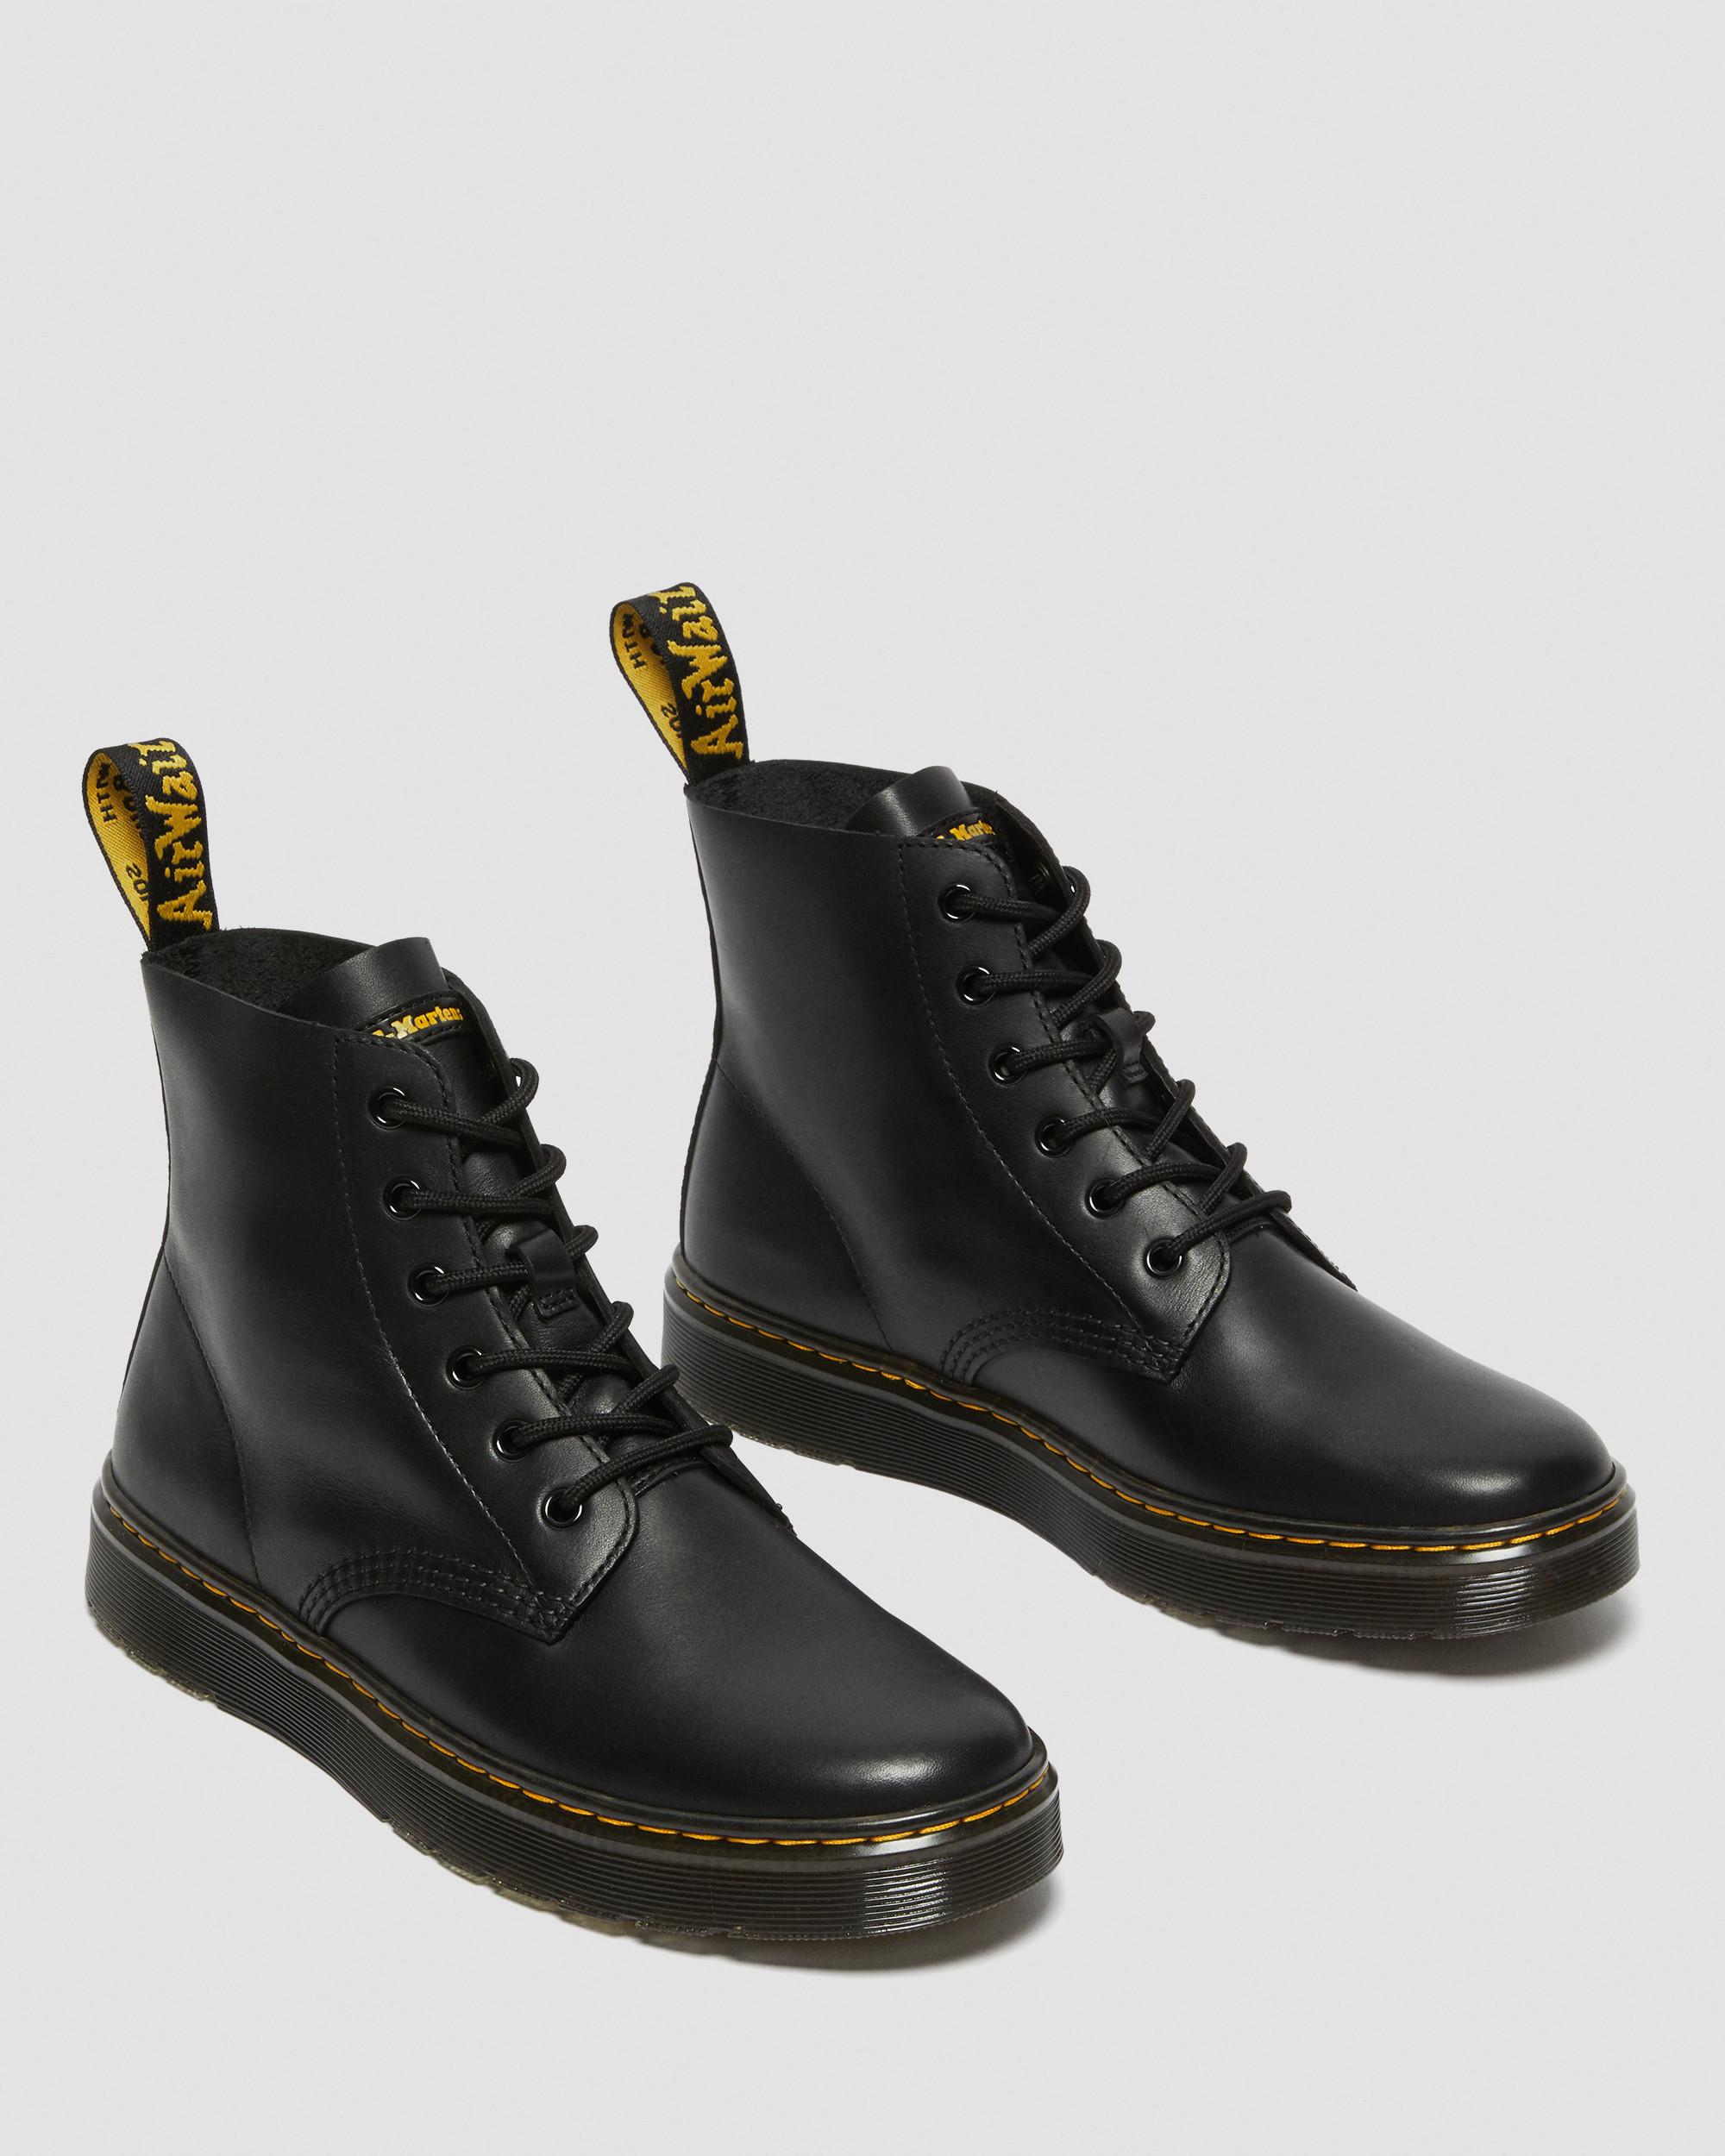 Thurston Lusso Leather Chukka Boots in Black